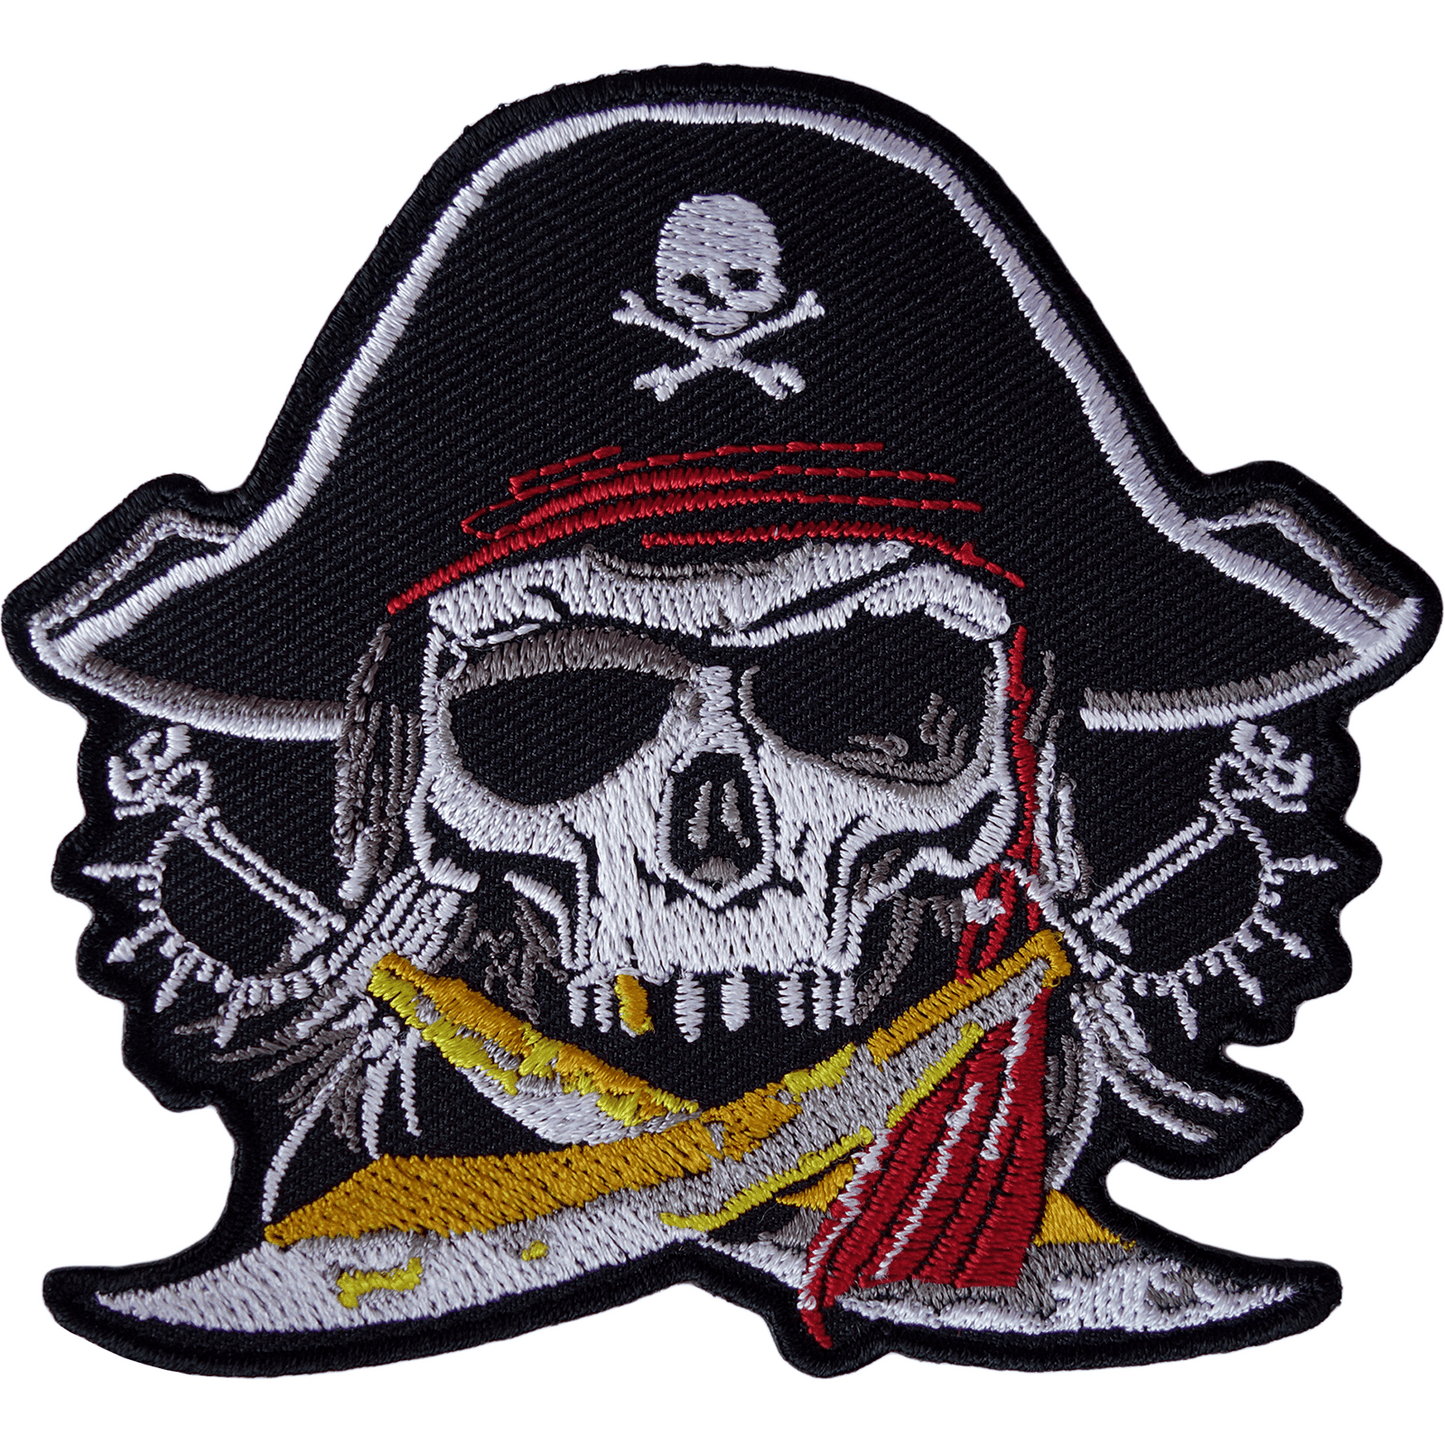 Pirate Iron On Patch Sew Fancy Dress Costume Skull Cutlass Hat Embroidered Badge